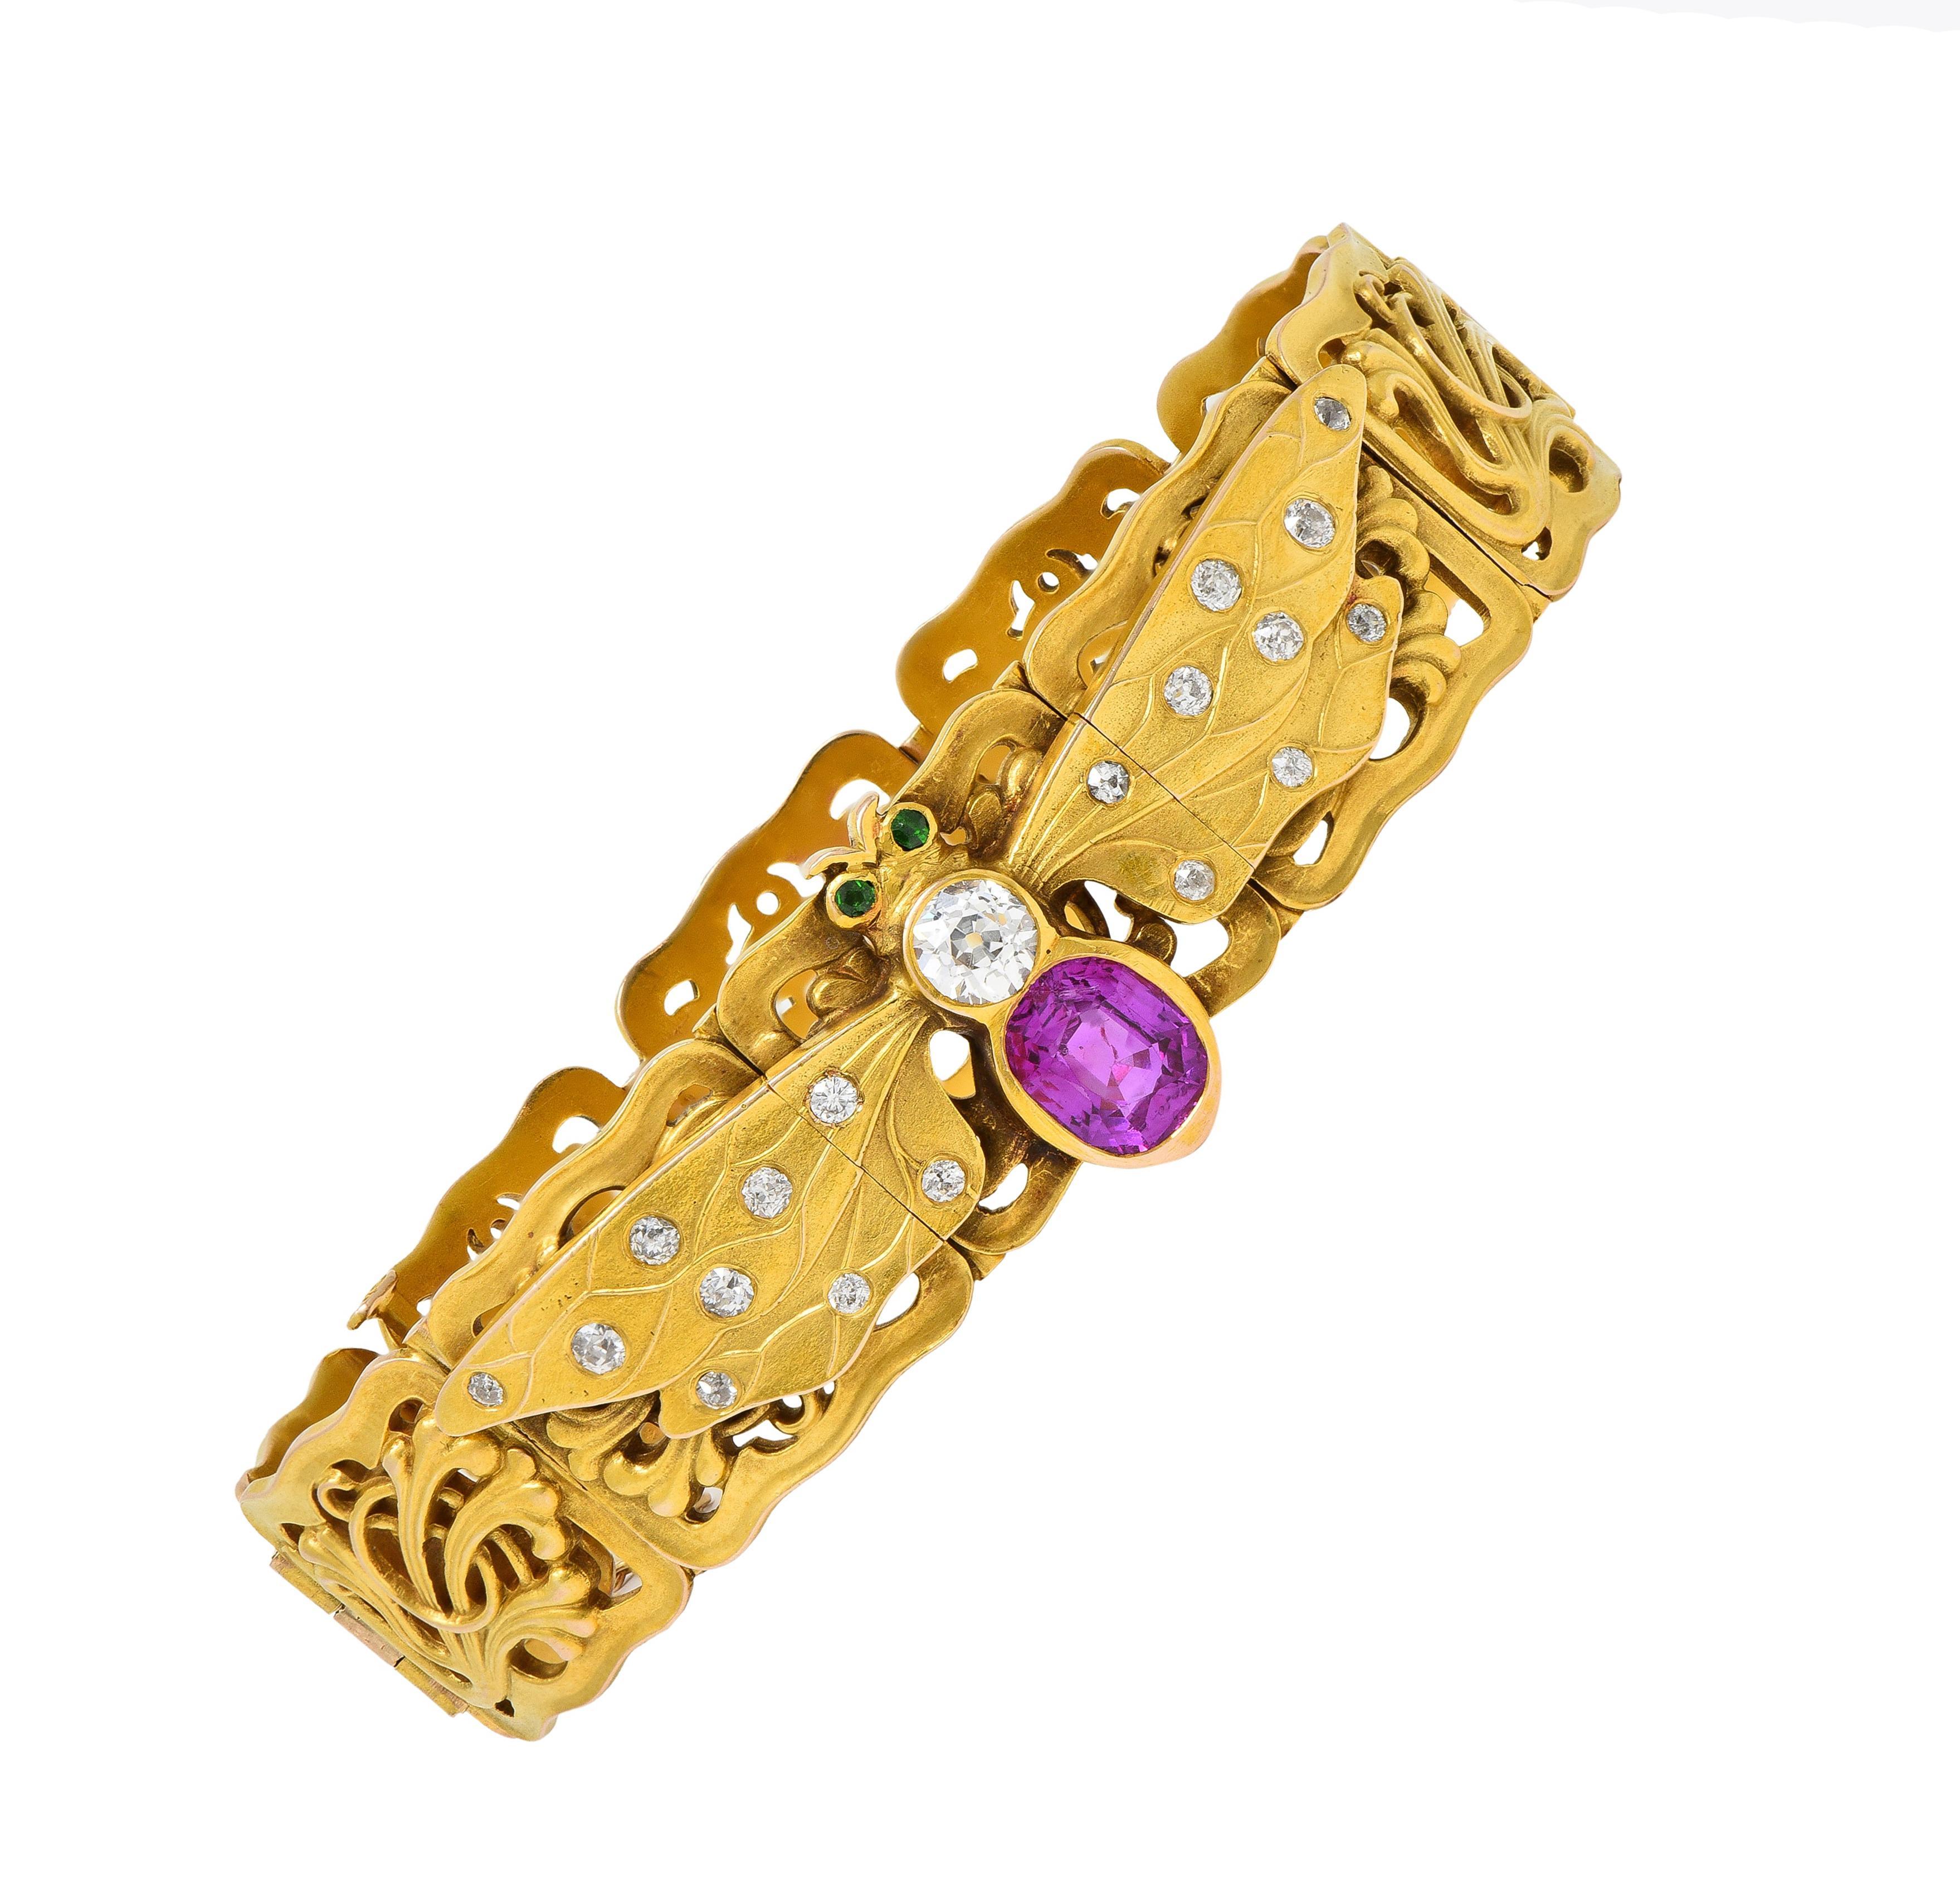 Comprised of hinged rectangular links with a pierced whiplash foliate motif
Centering a stylized bee motif appliqué with a cushion cut ruby body
Weighing approximately 1.70 carats - transparent purplish red in color 
Bezel set below an old European